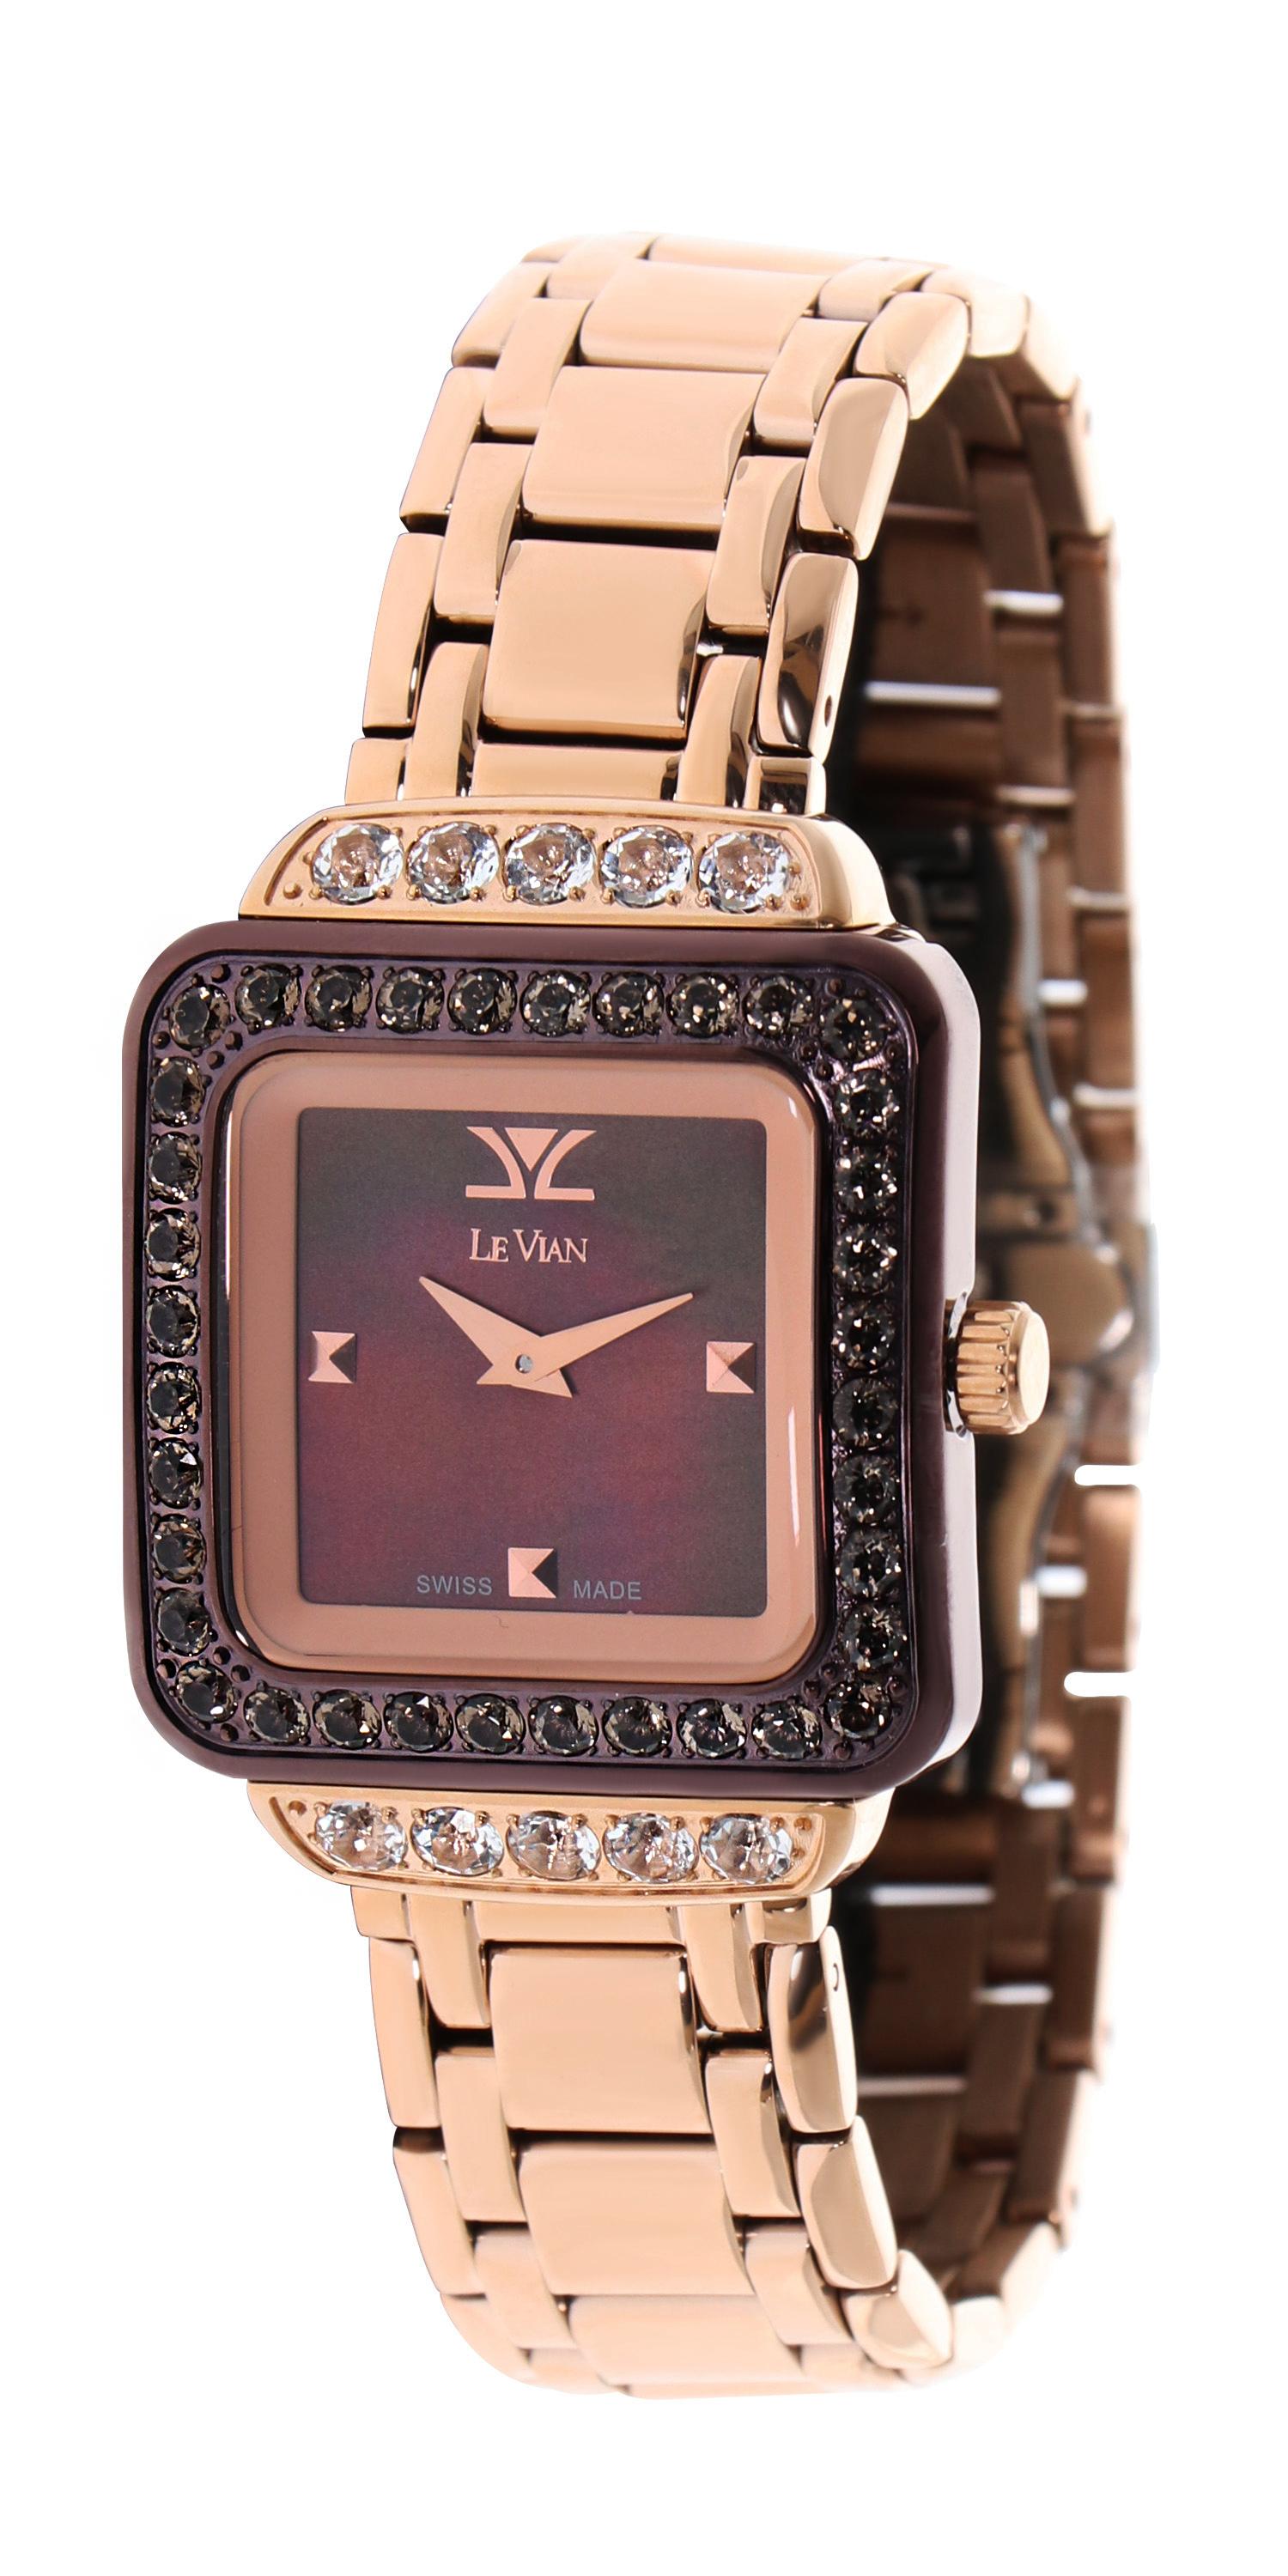 Le Vian 32mm Square Wristwatch featuring 1.98 of Chocolate Quartz and 2.05 of Vanilla Topaz in Strawberry Gold Stainless Steel.
